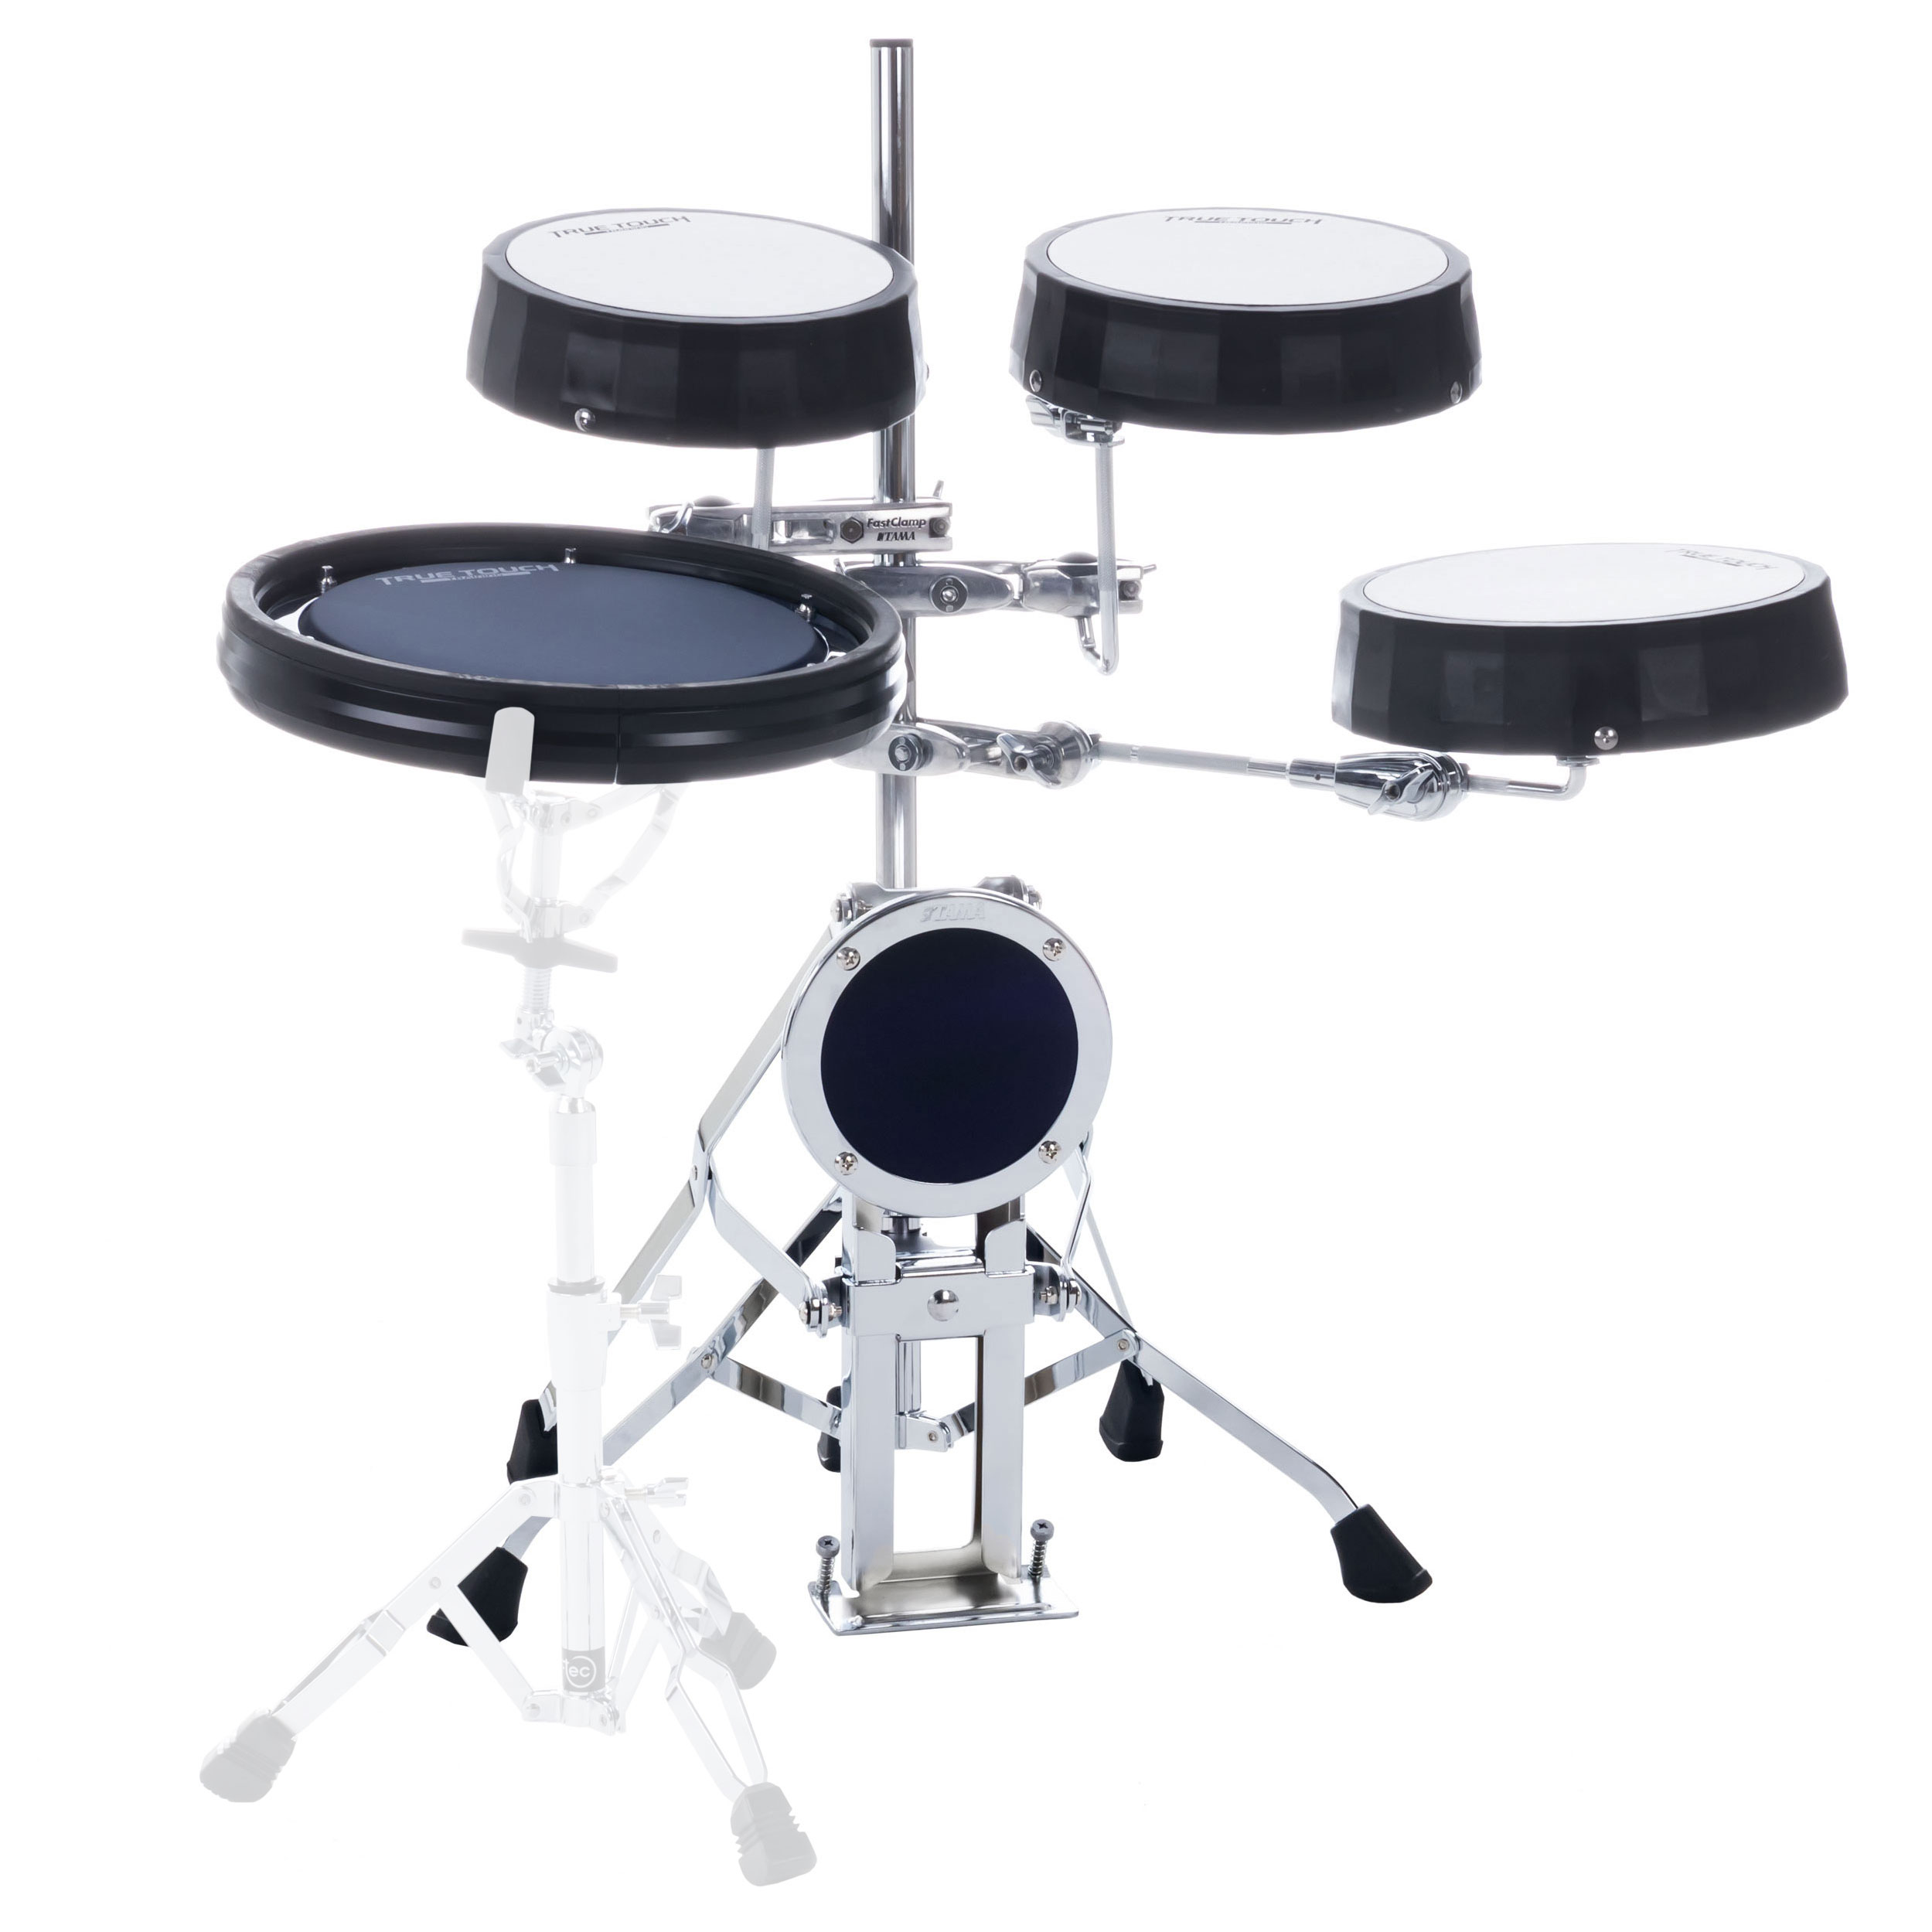 Tama True Touch Training Kit - 5 pièces